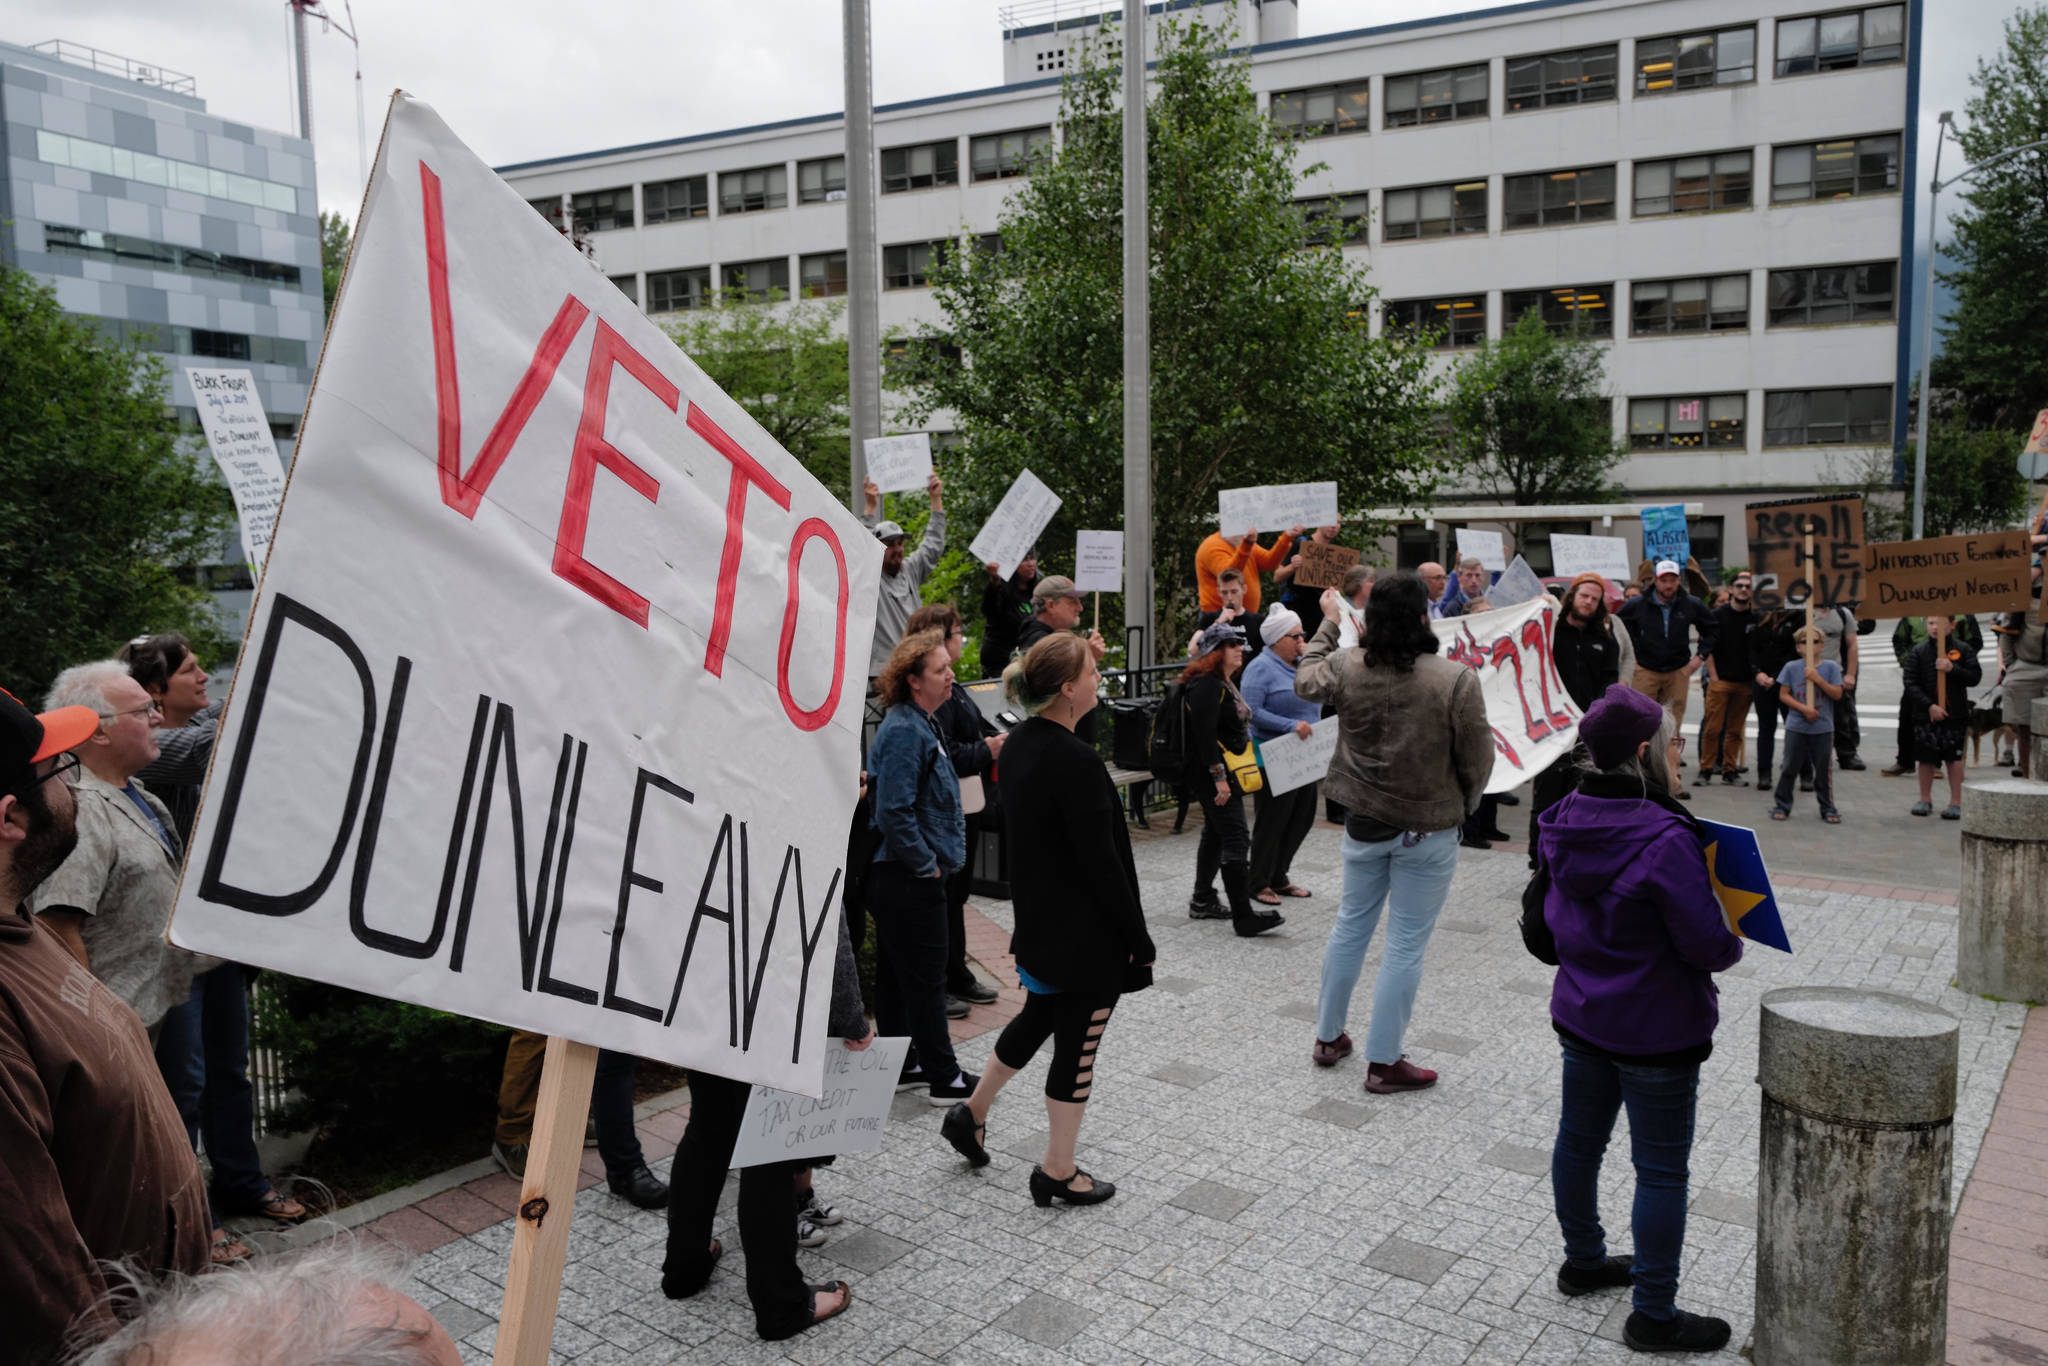 People attend a rally against Gov. Mike Dunleavy’s budget vetoes in front of the Capitol on Friday, July 12, 2019. (Michael Penn | Juneau Empire)